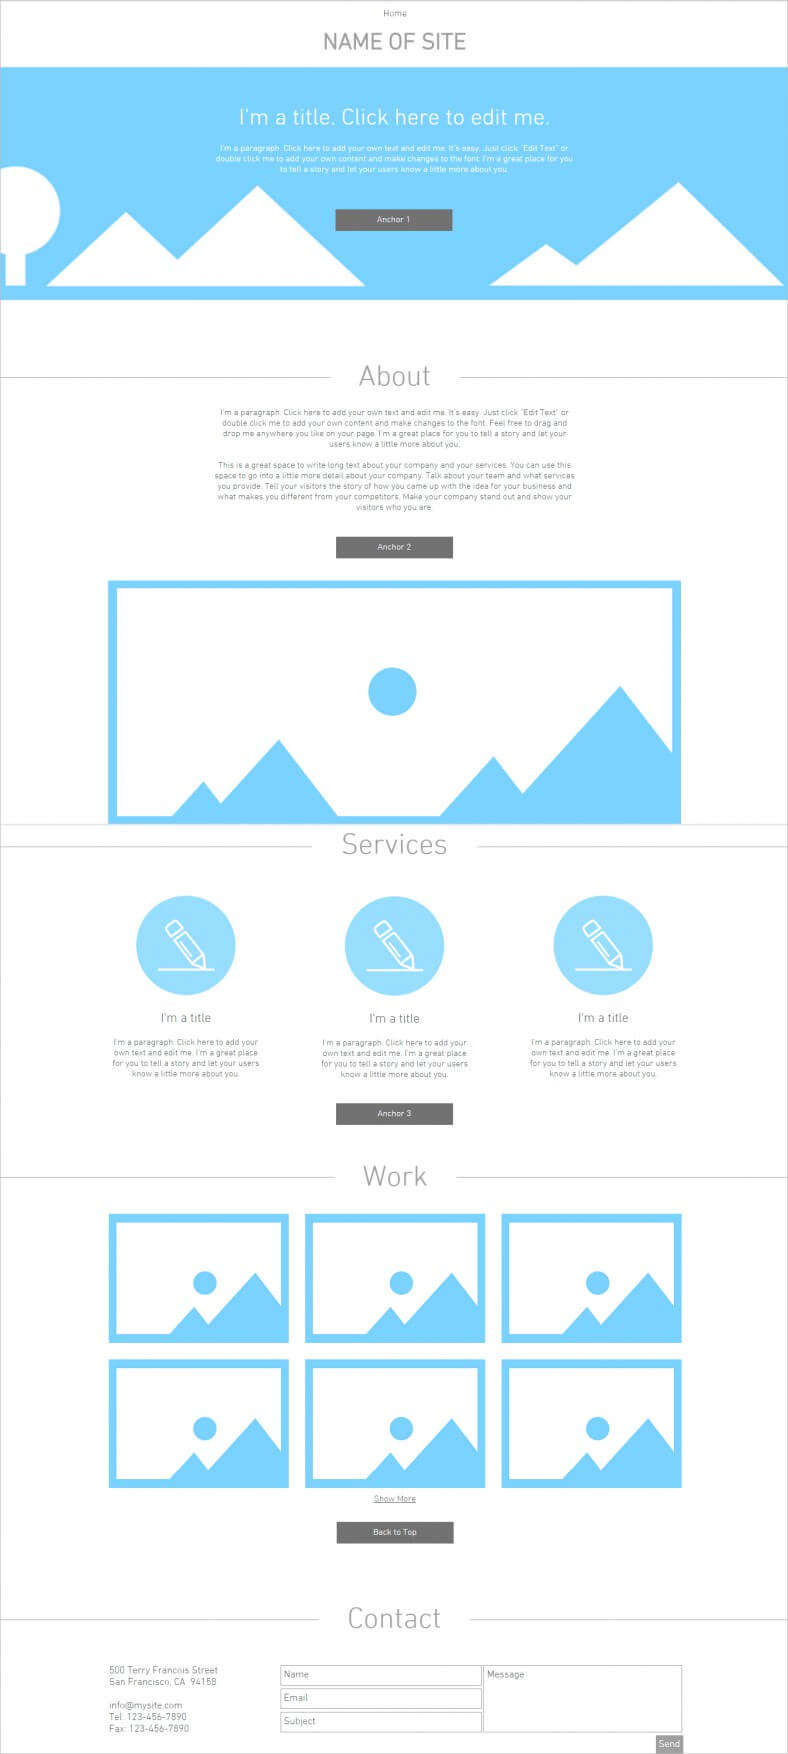 Blank Html5 Website Templates & Themes | Free & Premium Throughout Html5 Blank Page Template